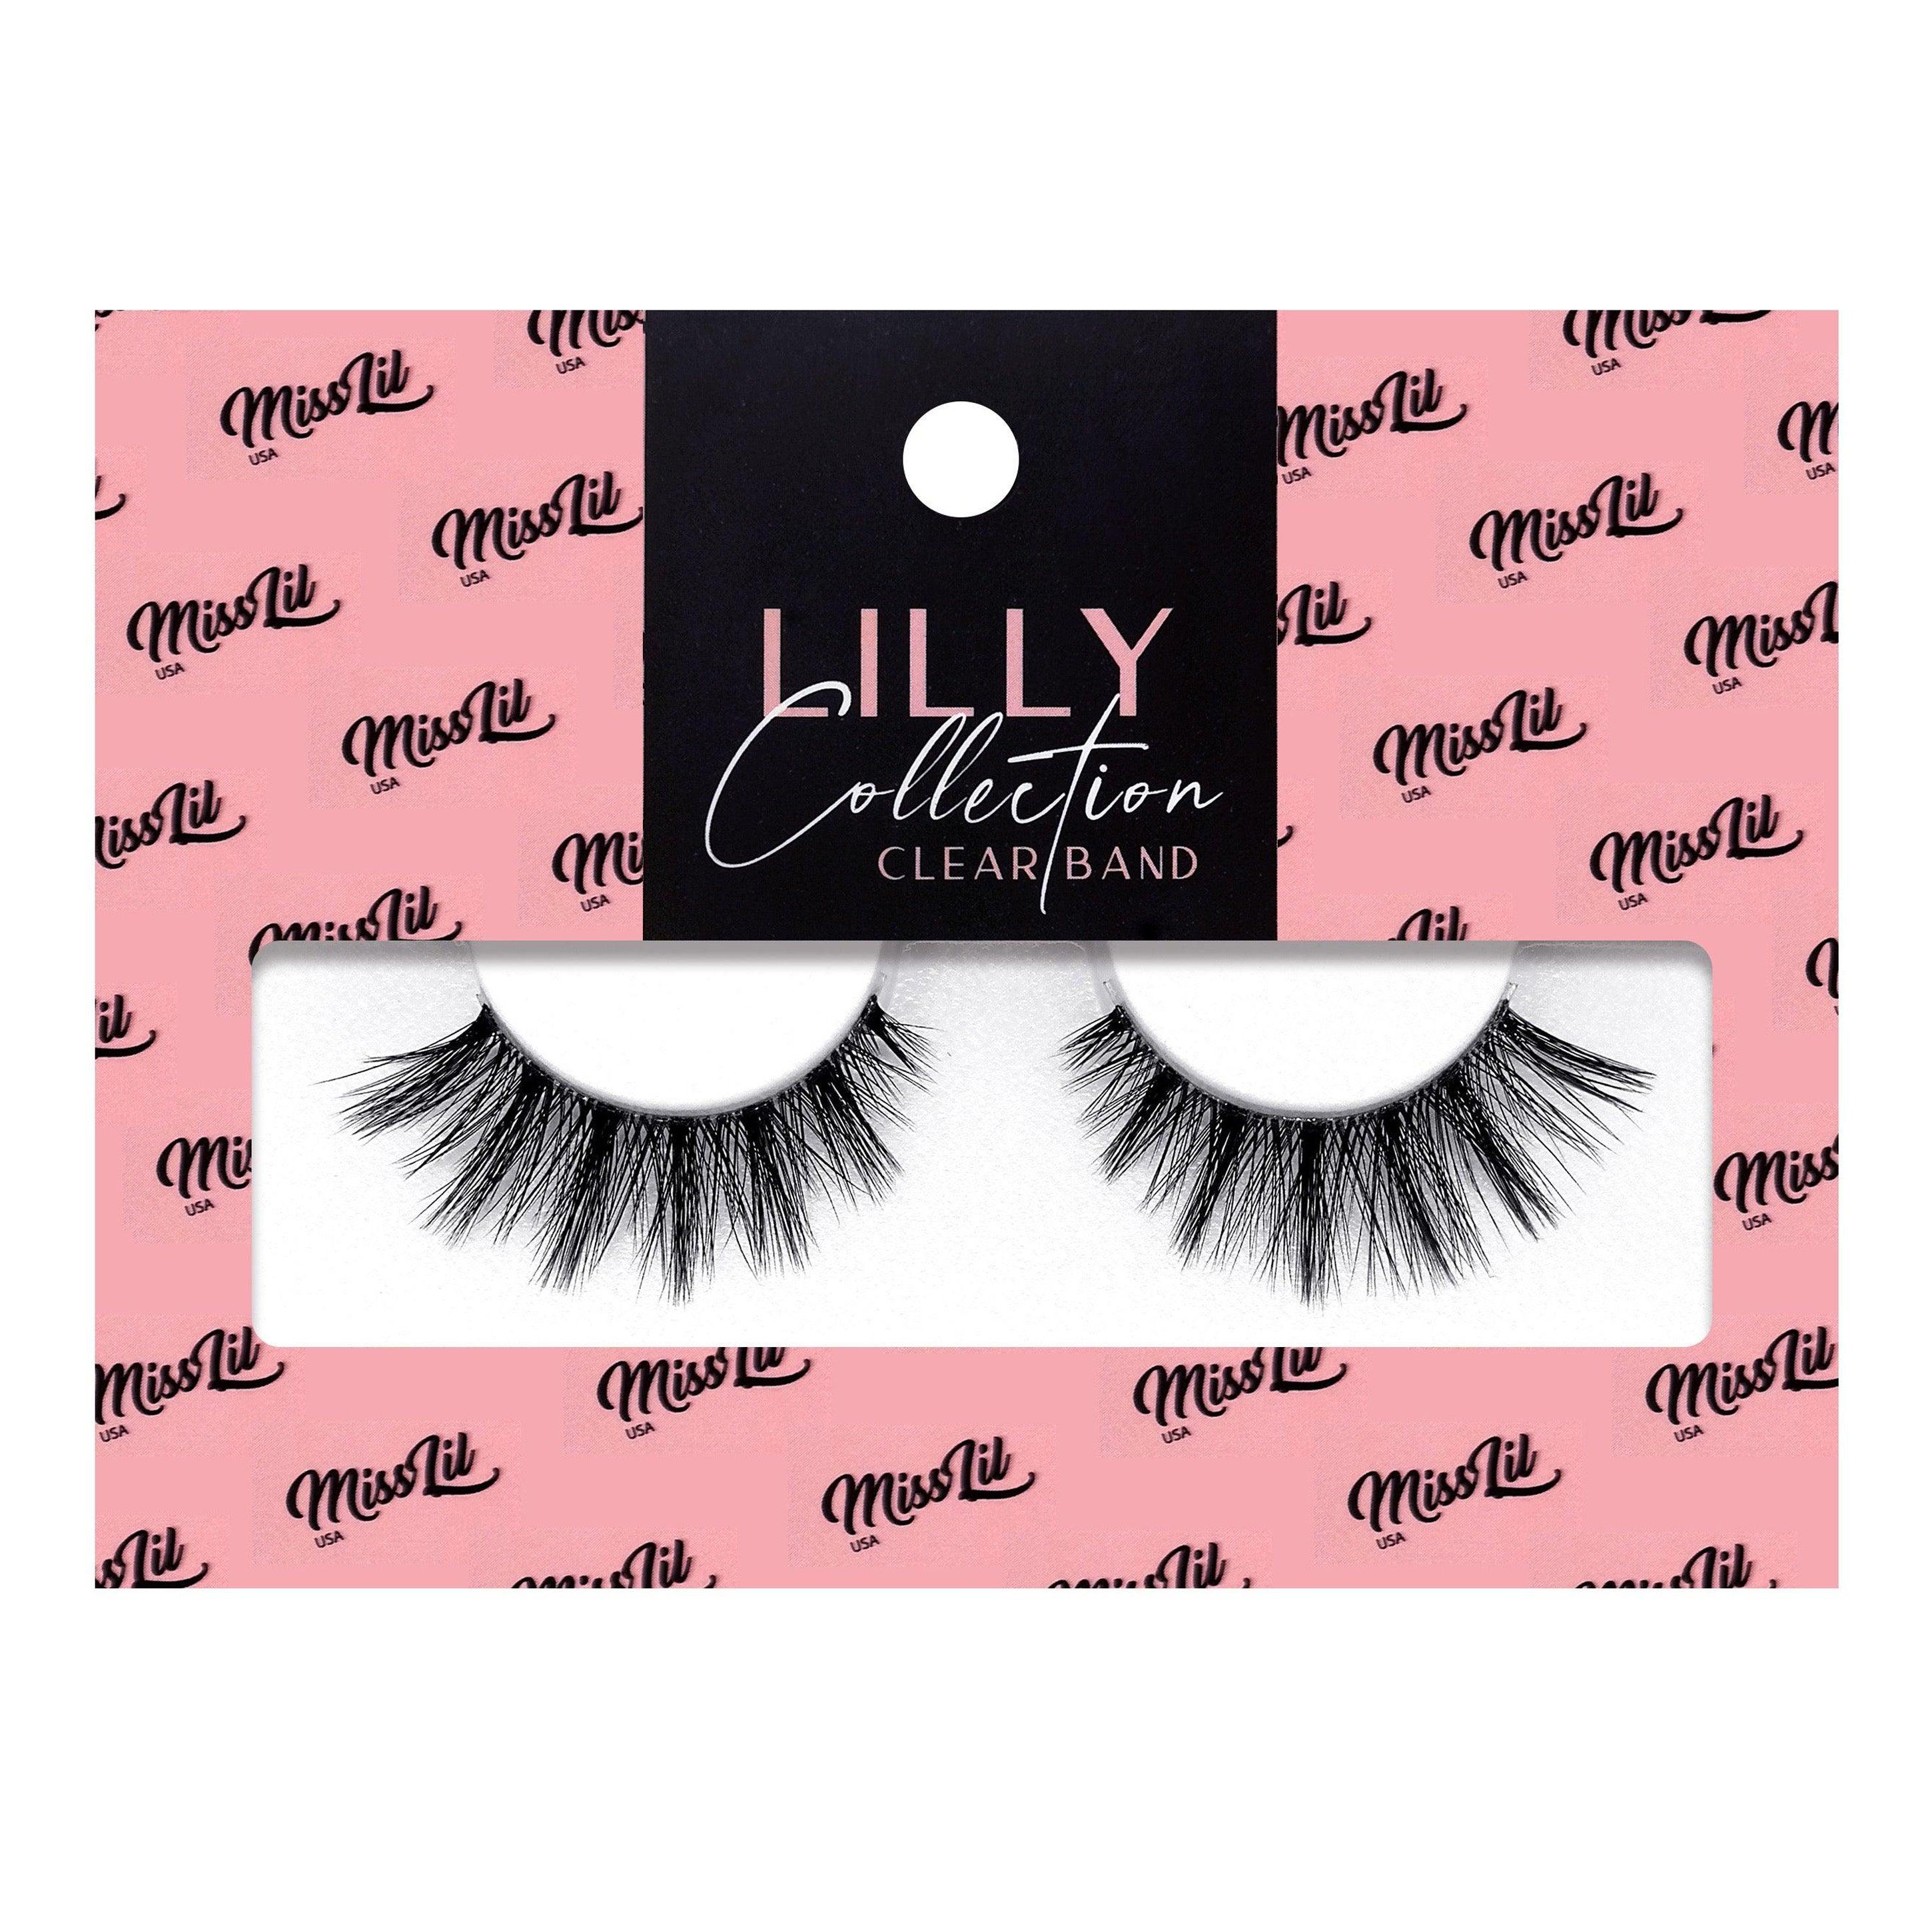 1-Pair Lashes-Lilly Collection #3 (Pack of 12) - Miss Lil USA Wholesale